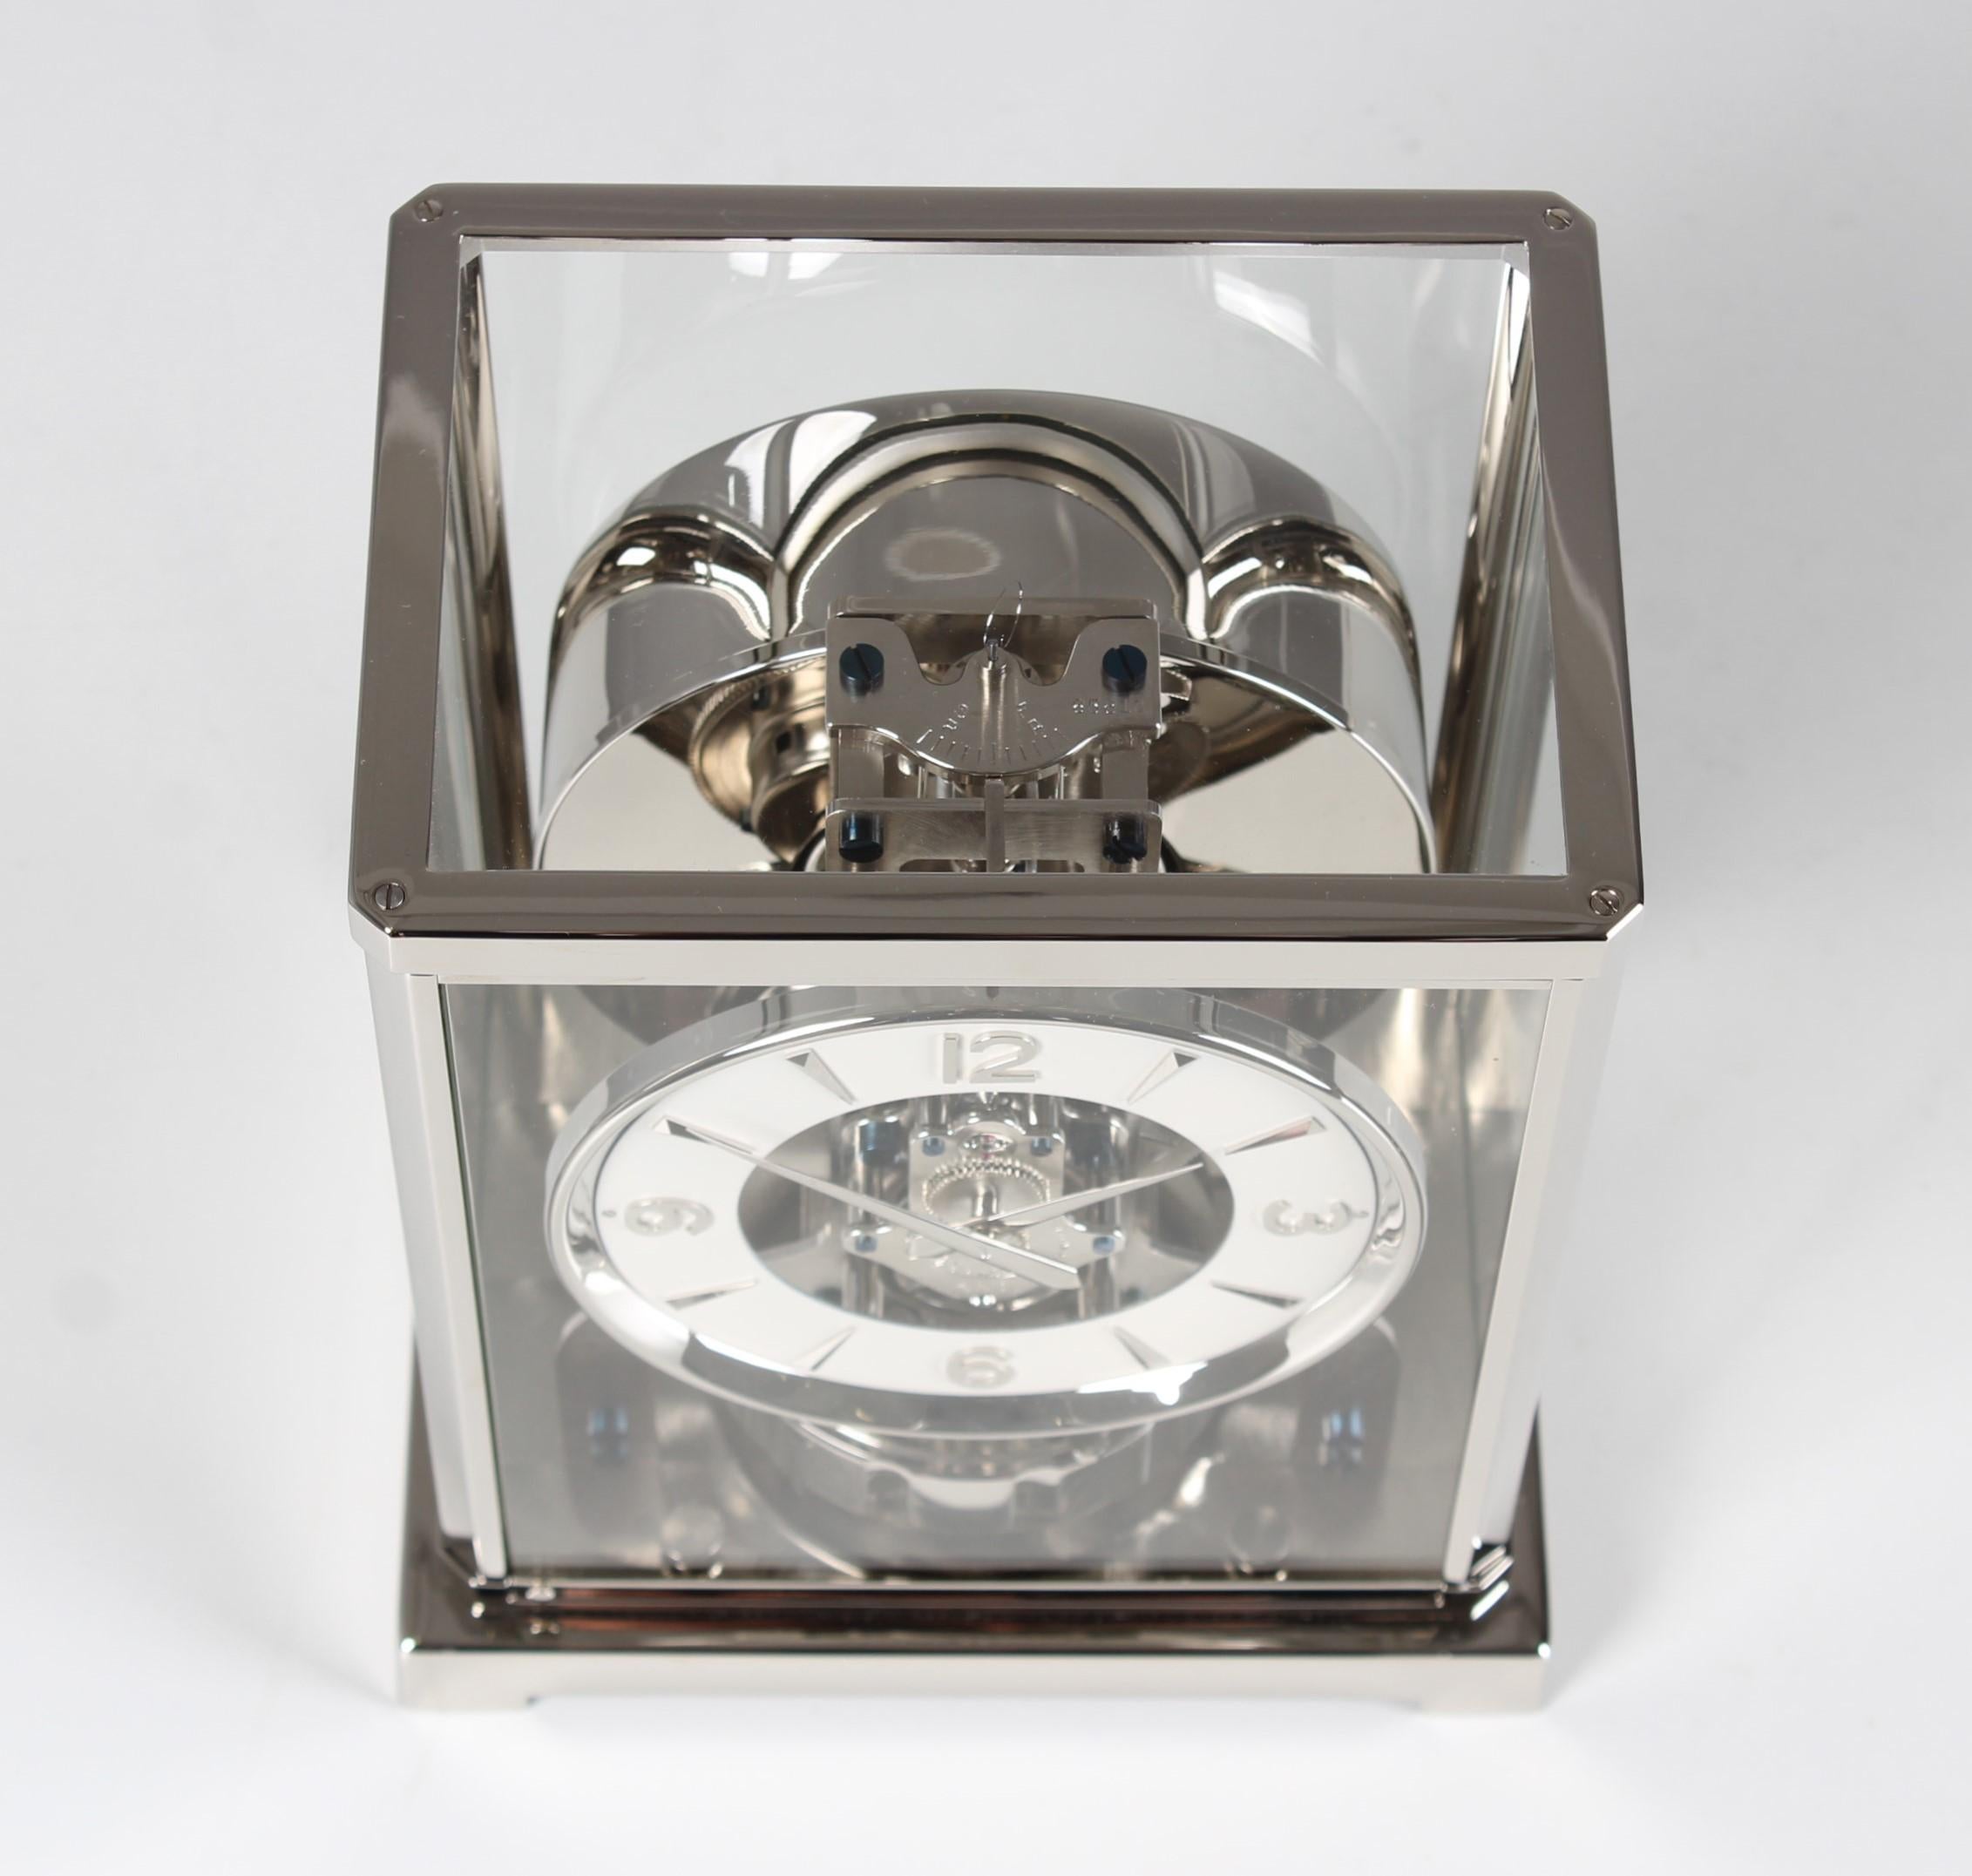 Jaeger LeCoultre, Silver Atmos Clock from 1955, Revised and New Nickel-Plated 4